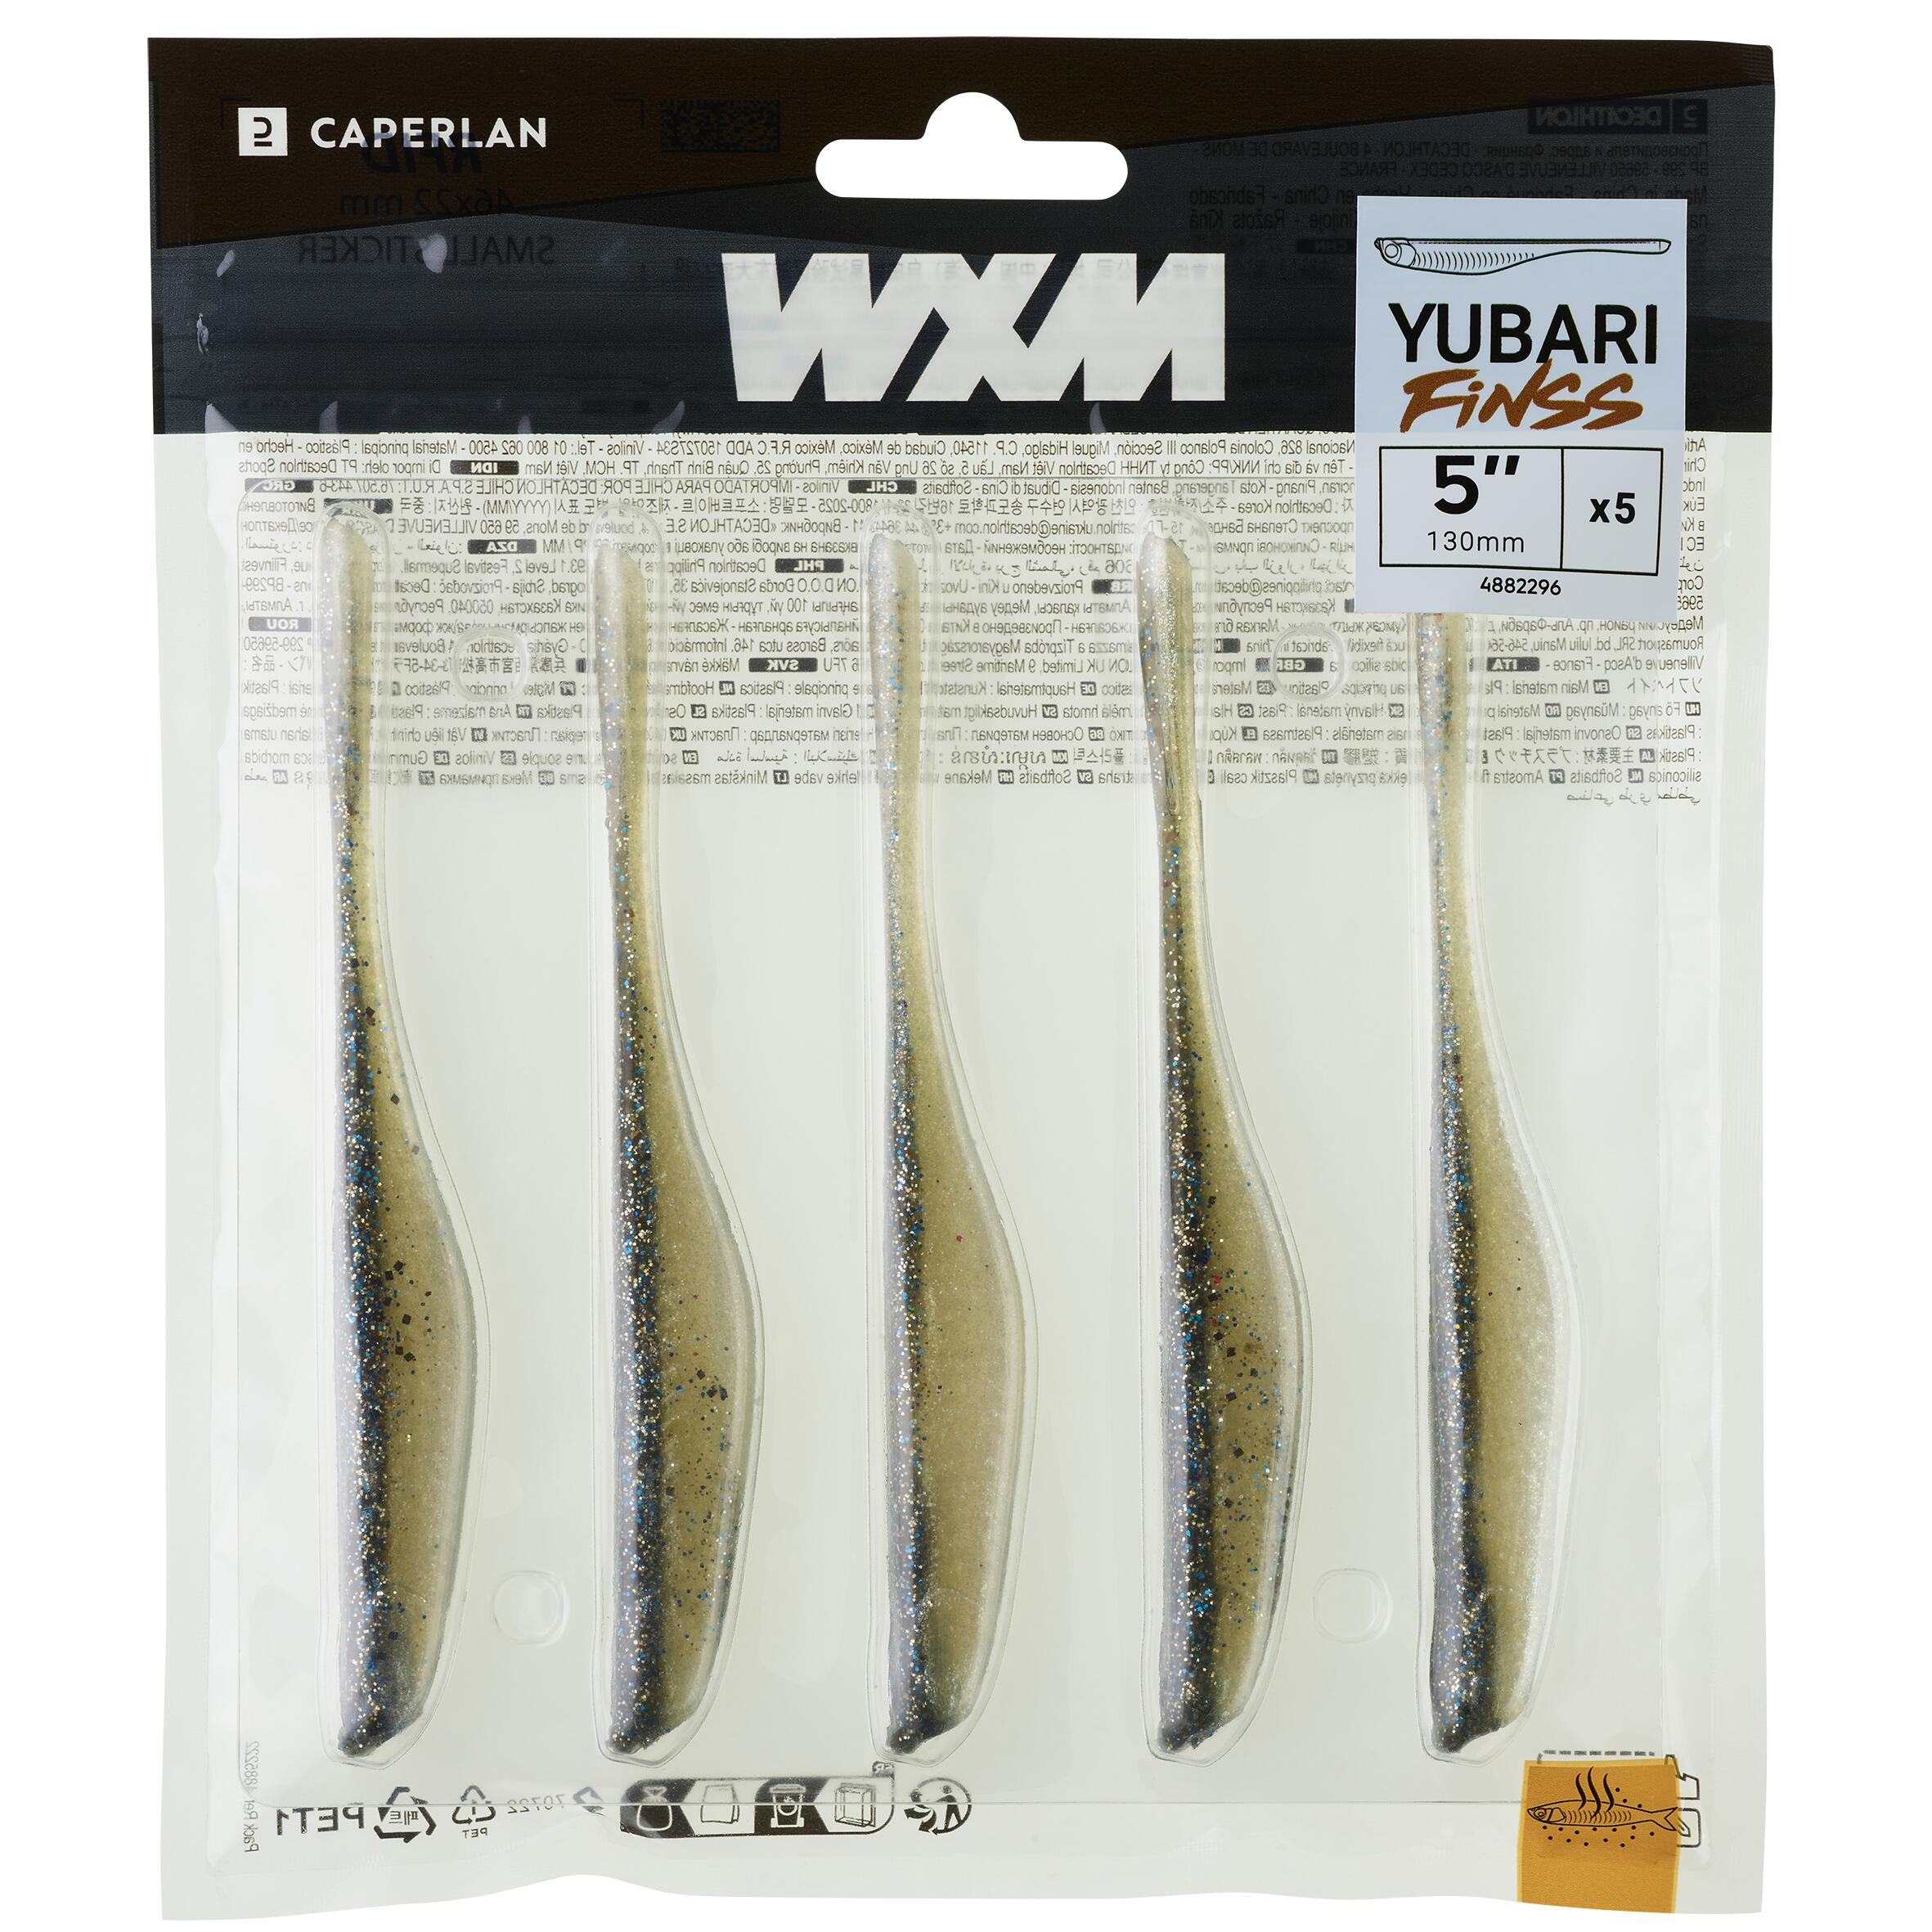 FINESSE SOFT LURE WITH WXM YUBARI FINSS 130 ATTRACTANT FISH 4/7